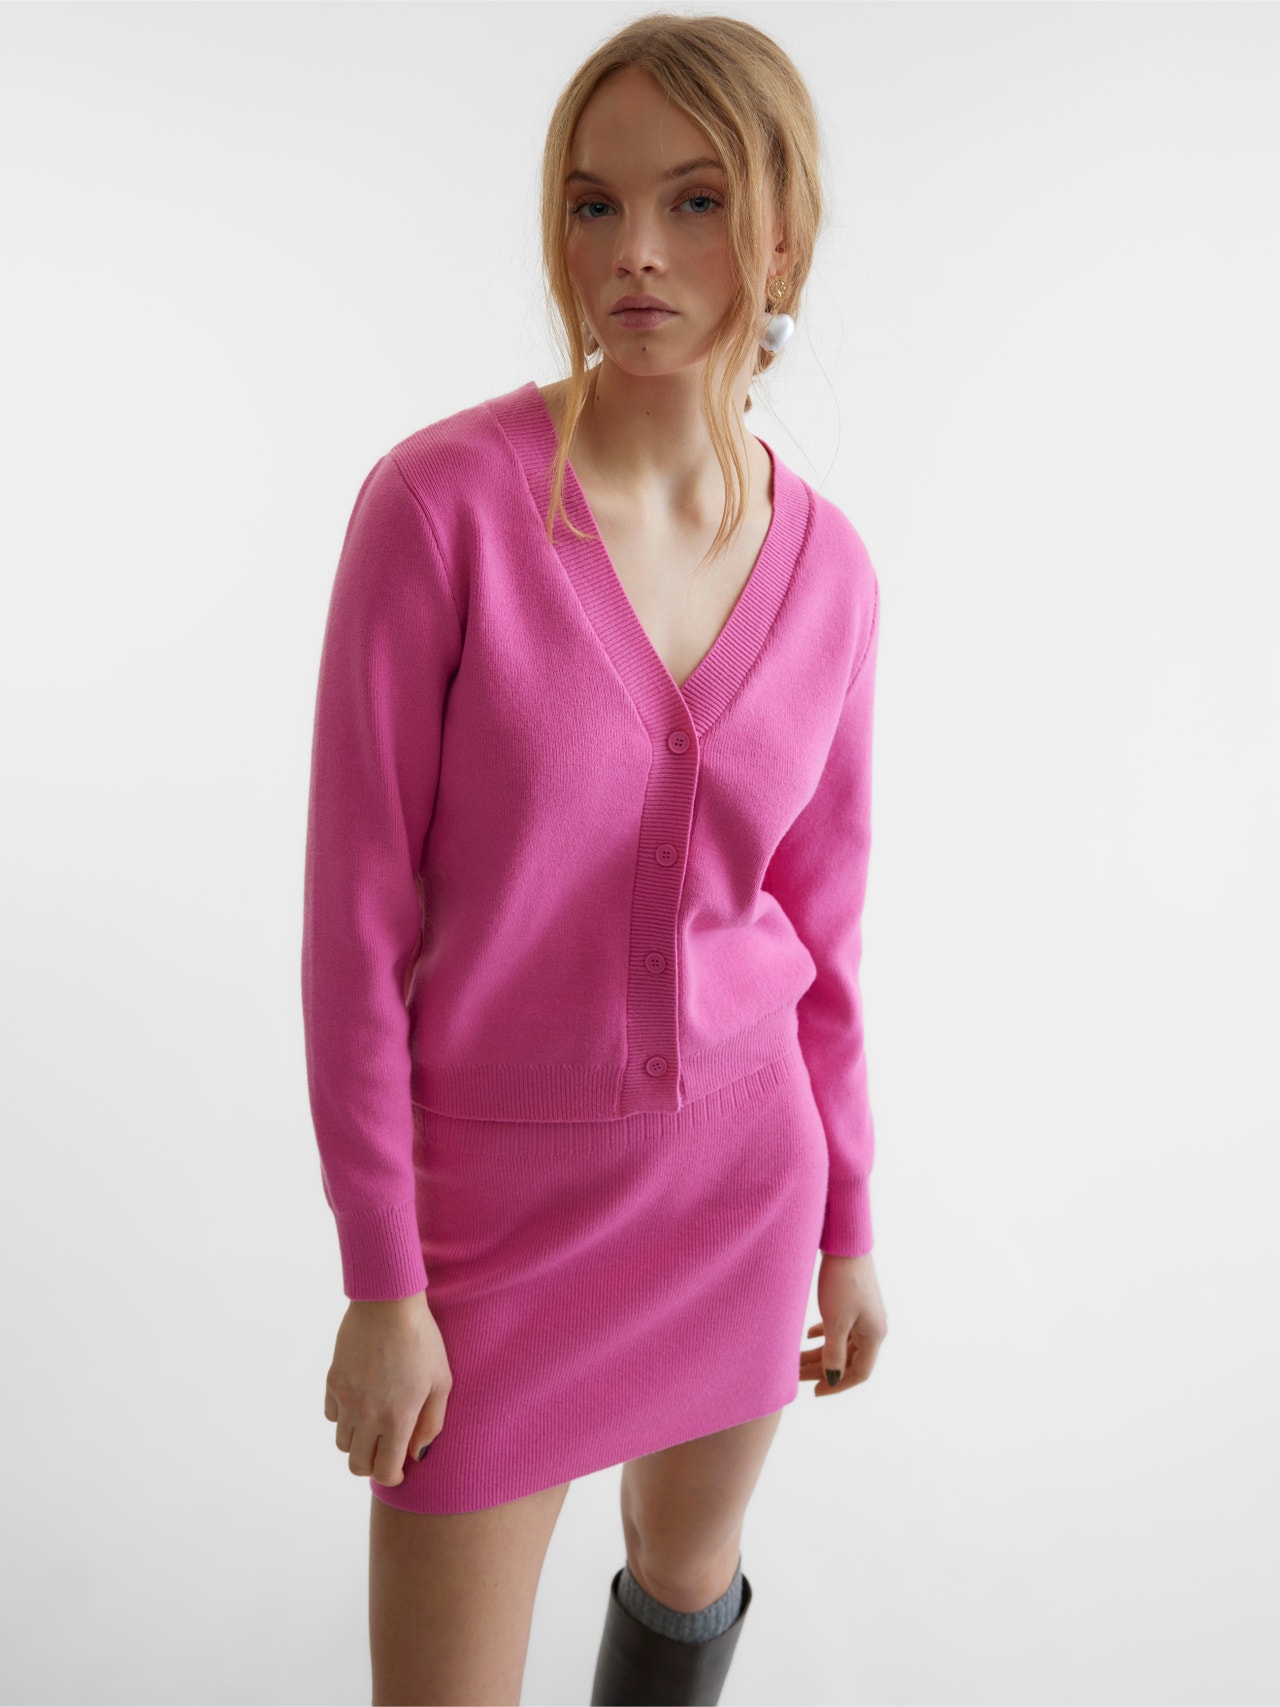 Vero Moda SOMETHING NEW PROJECT; CHLOE FRATER  Cardigans en maille -Super Pink - 10301618